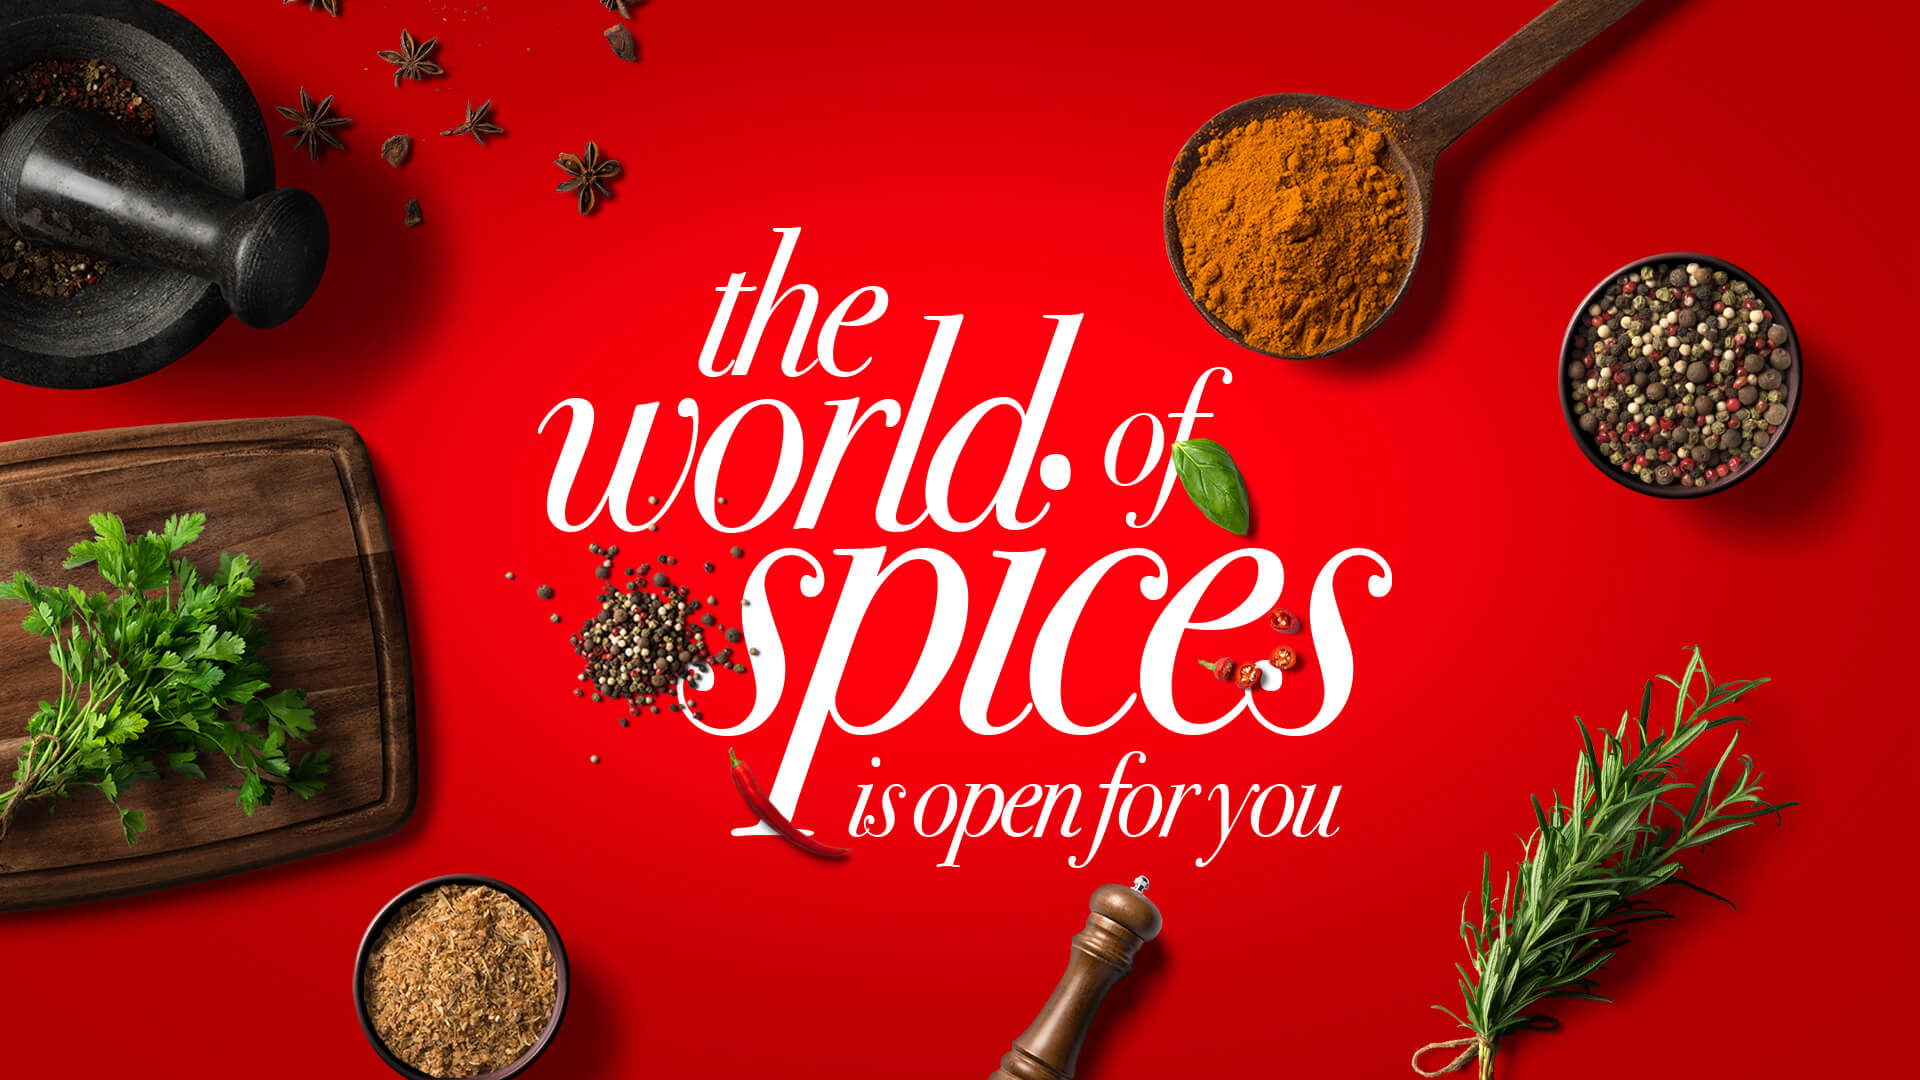 The world of spice